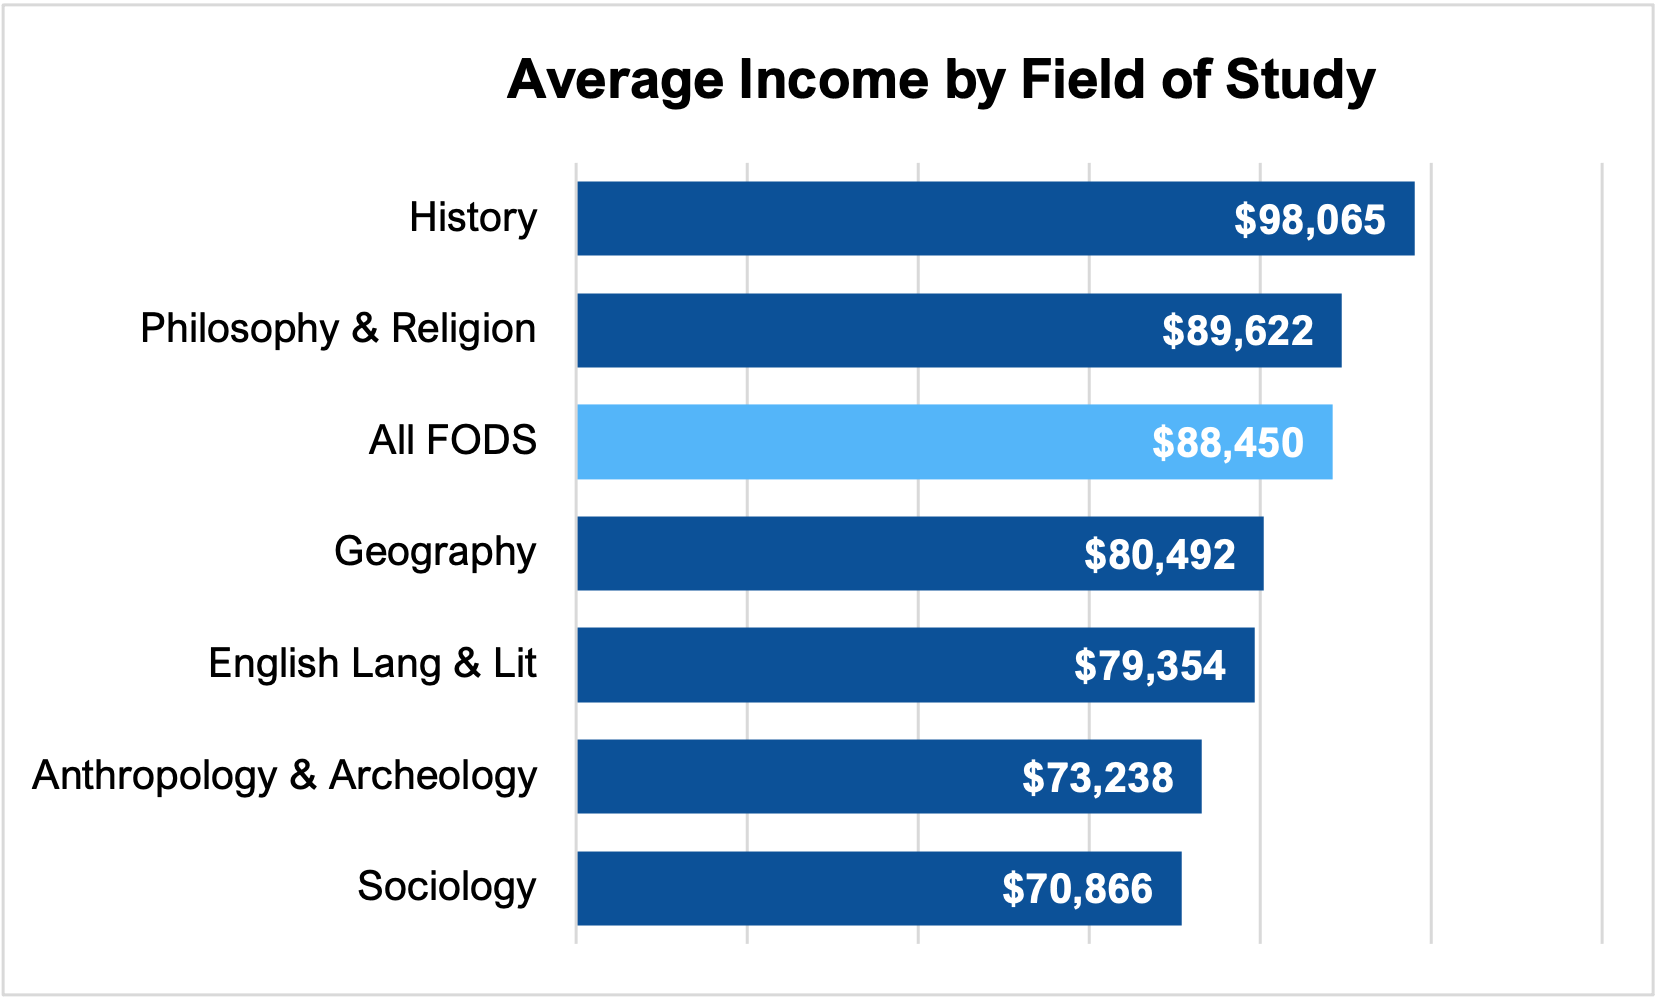 Bar Chart showing the average income by Field of Study with History at the top, followed by Philosophy and Religion in second, All PODS in third, Geography in fourth, English Language and Literature in fifth, Anthropology and Archaeology in 6th, and Sociology in last place